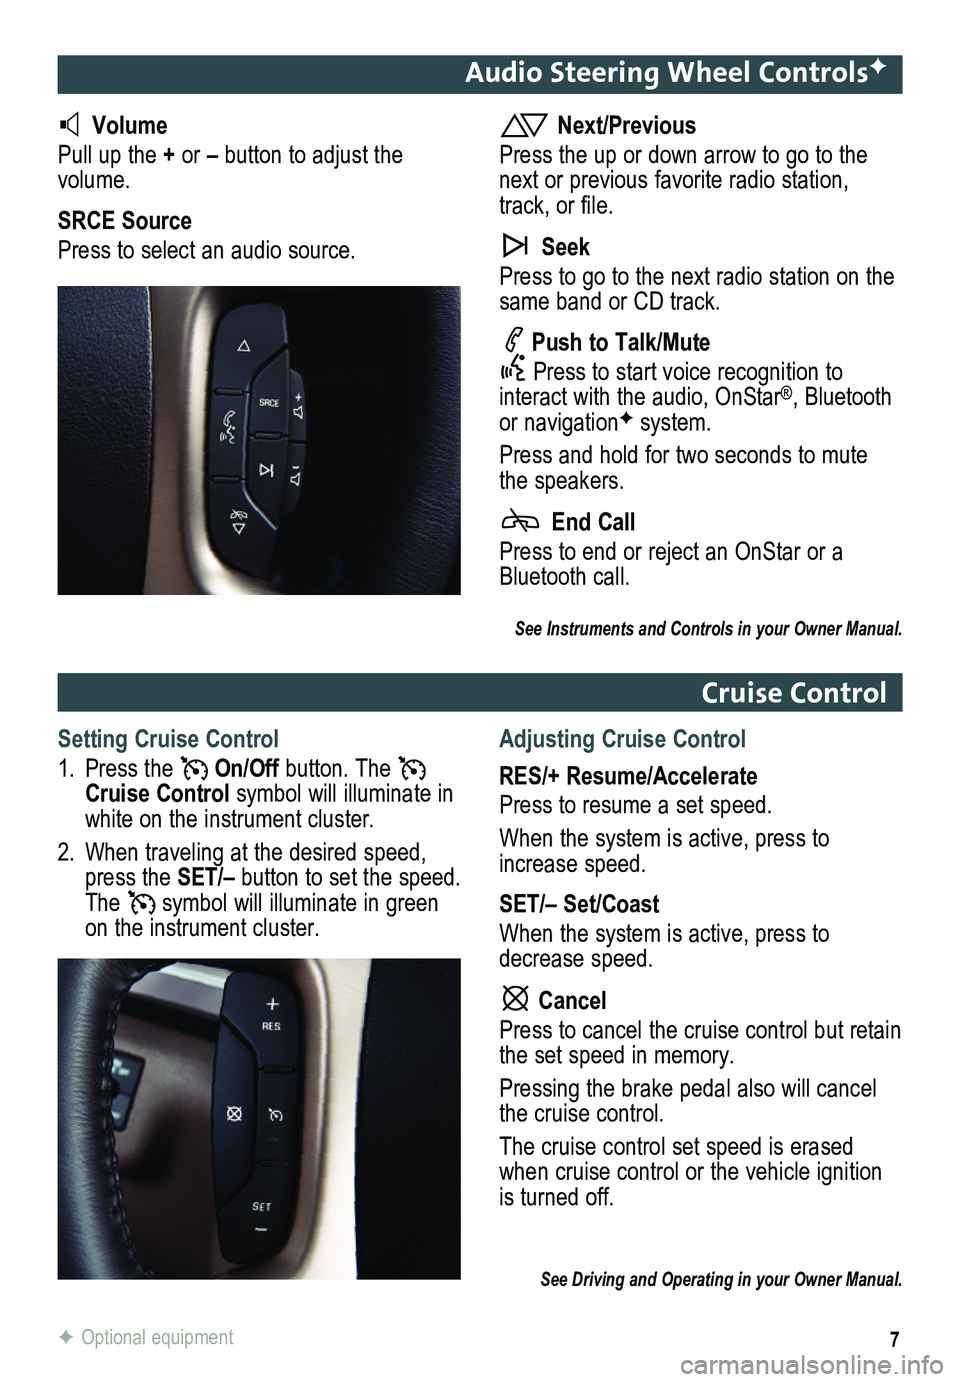 GMC ACADIA 2014  Get To Know Guide 7
Audio Steering Wheel ControlsF
  Volume
Pull up the + or – button to adjust the volume.
SRCE Source
Press to select an audio source.
 Next/Previous
Press the up or down arrow to go to the next or 